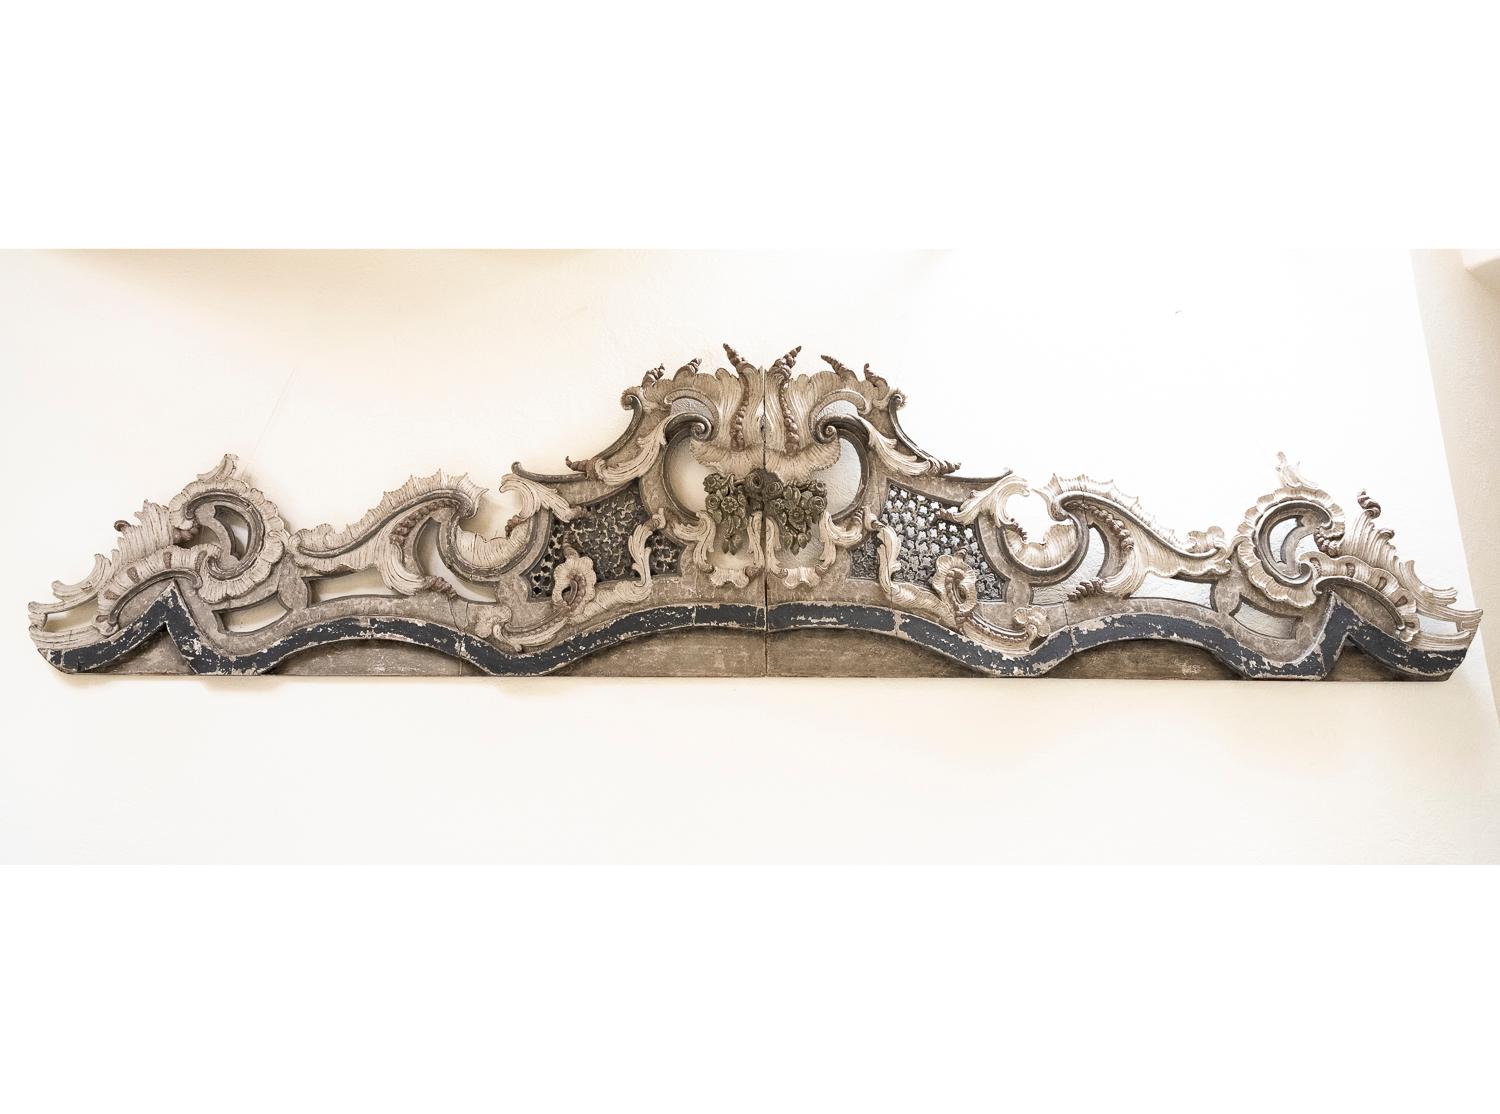 This rather large “fronton” or pediment spent the last 250 years dominating the entrance doors to an hotel particulier — or city mansion — in Lyon, France. Made of carved wood that was then painted, it is composed of 2 pieces that connect in the